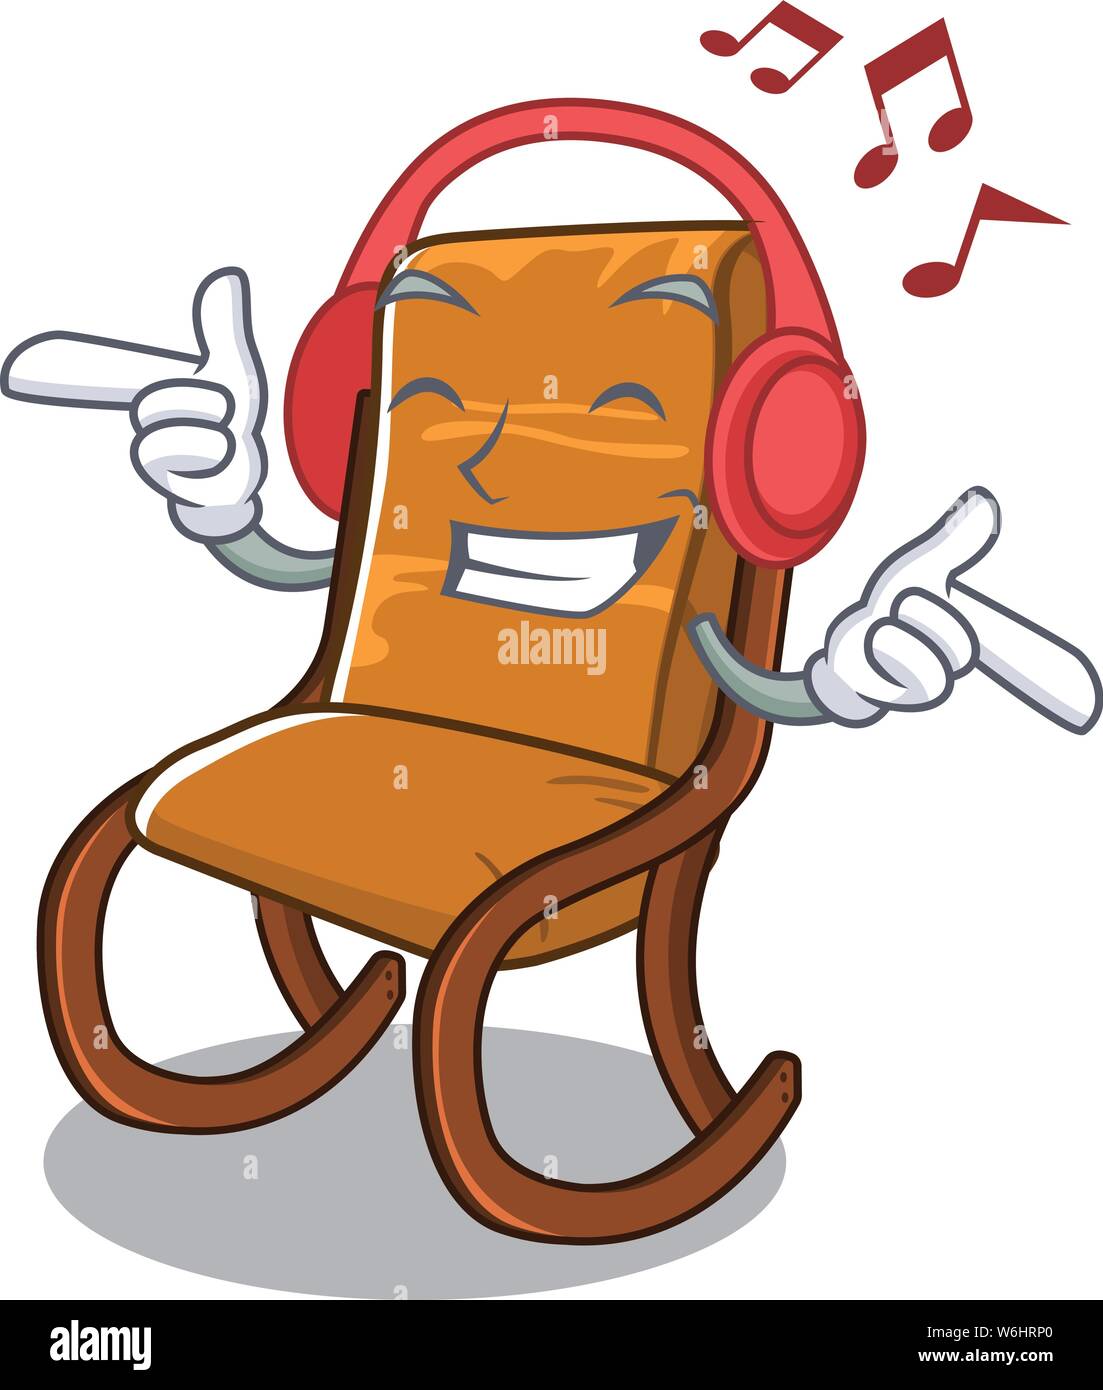 Listening music rocking chair in the cartoon shape Stock Vector Image ...